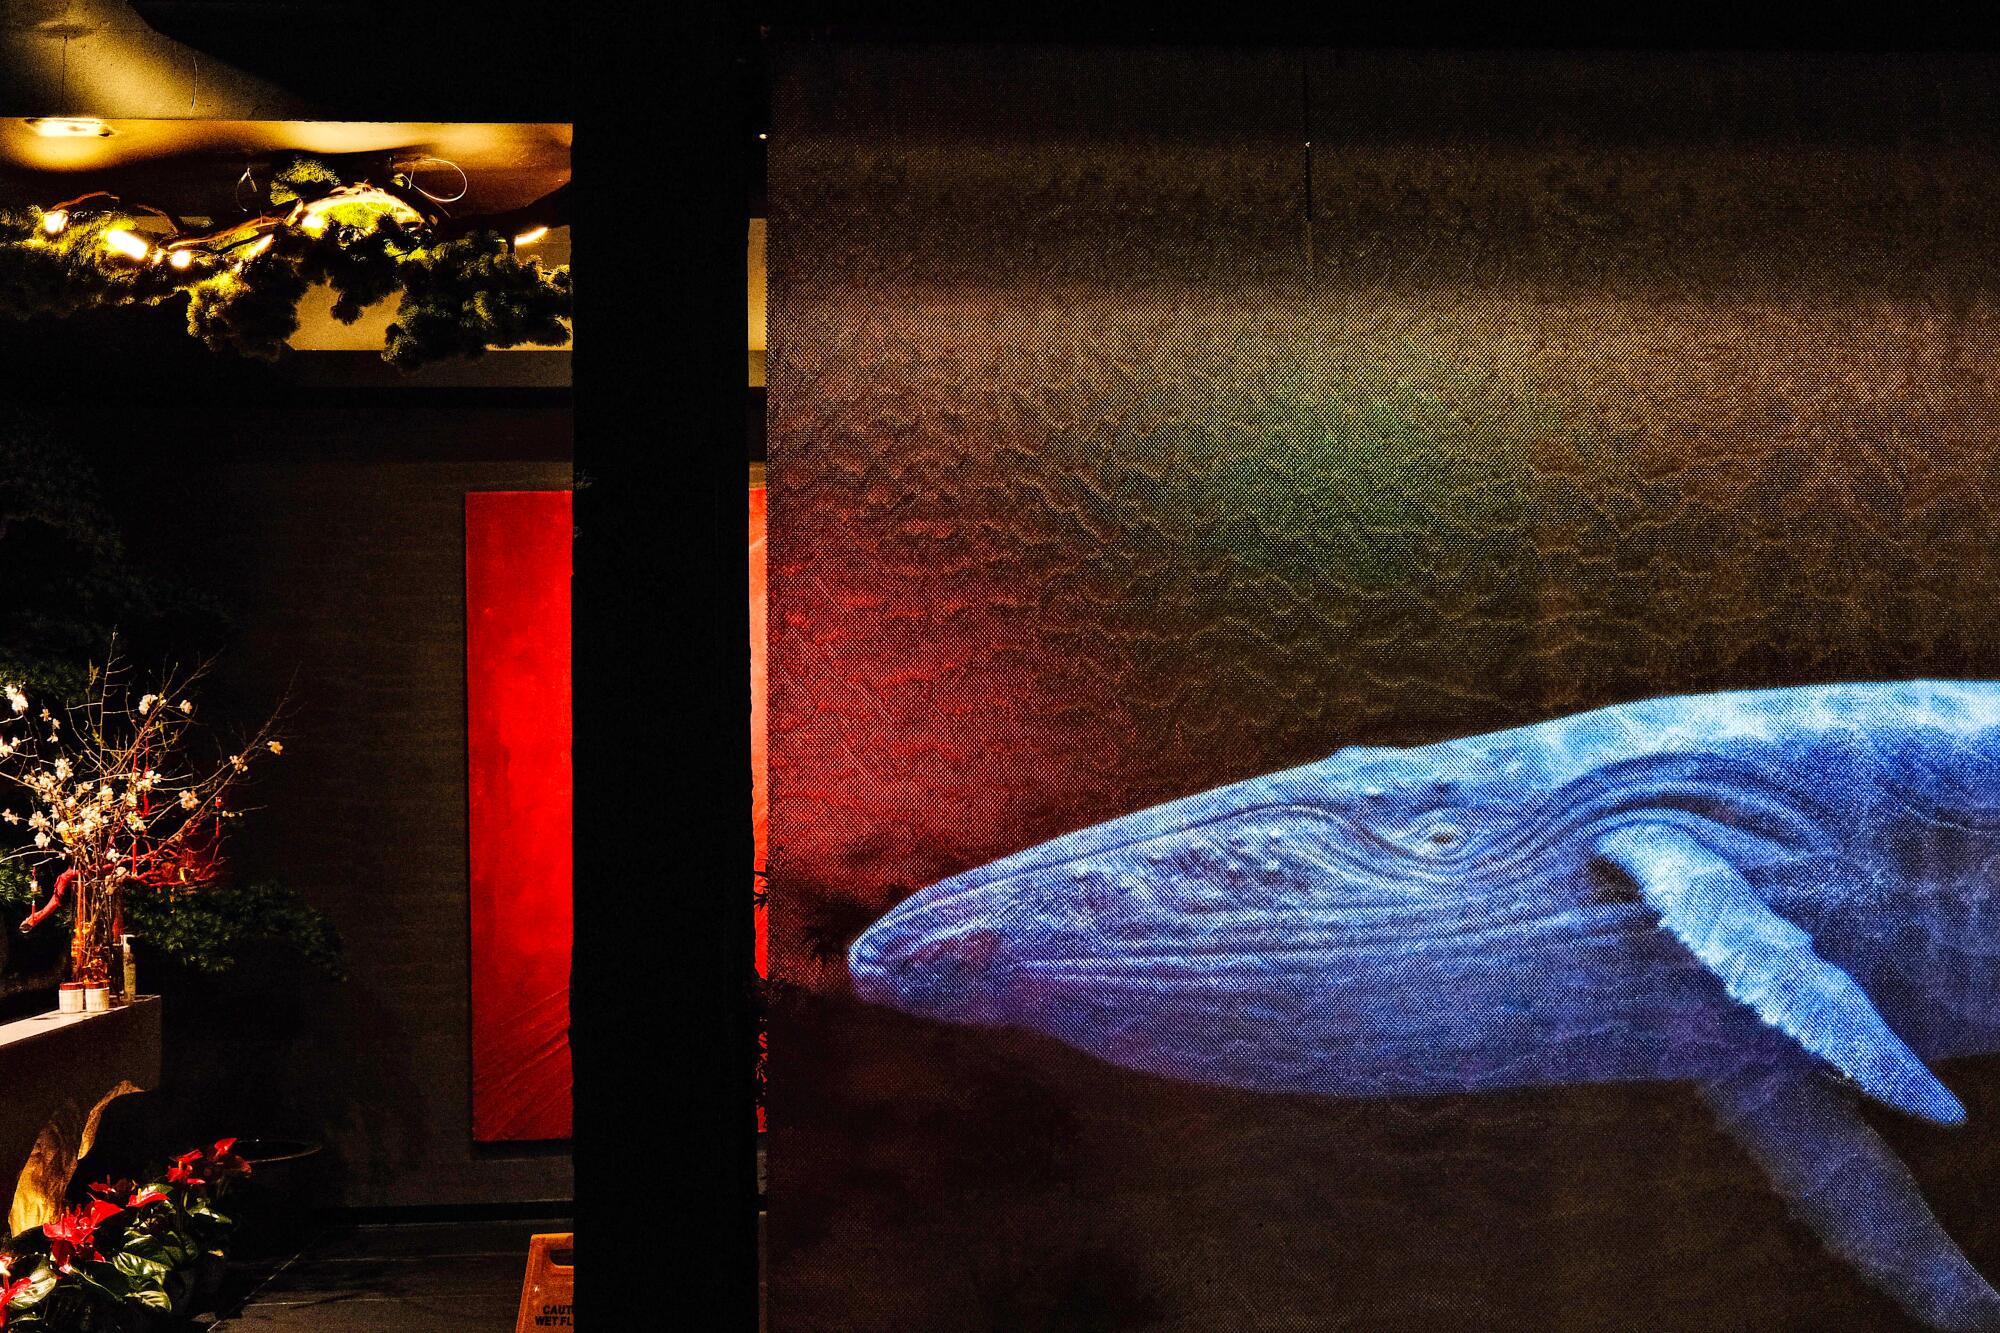 A whale swims by, projected onto a curtain in the entryway of the restaurant.